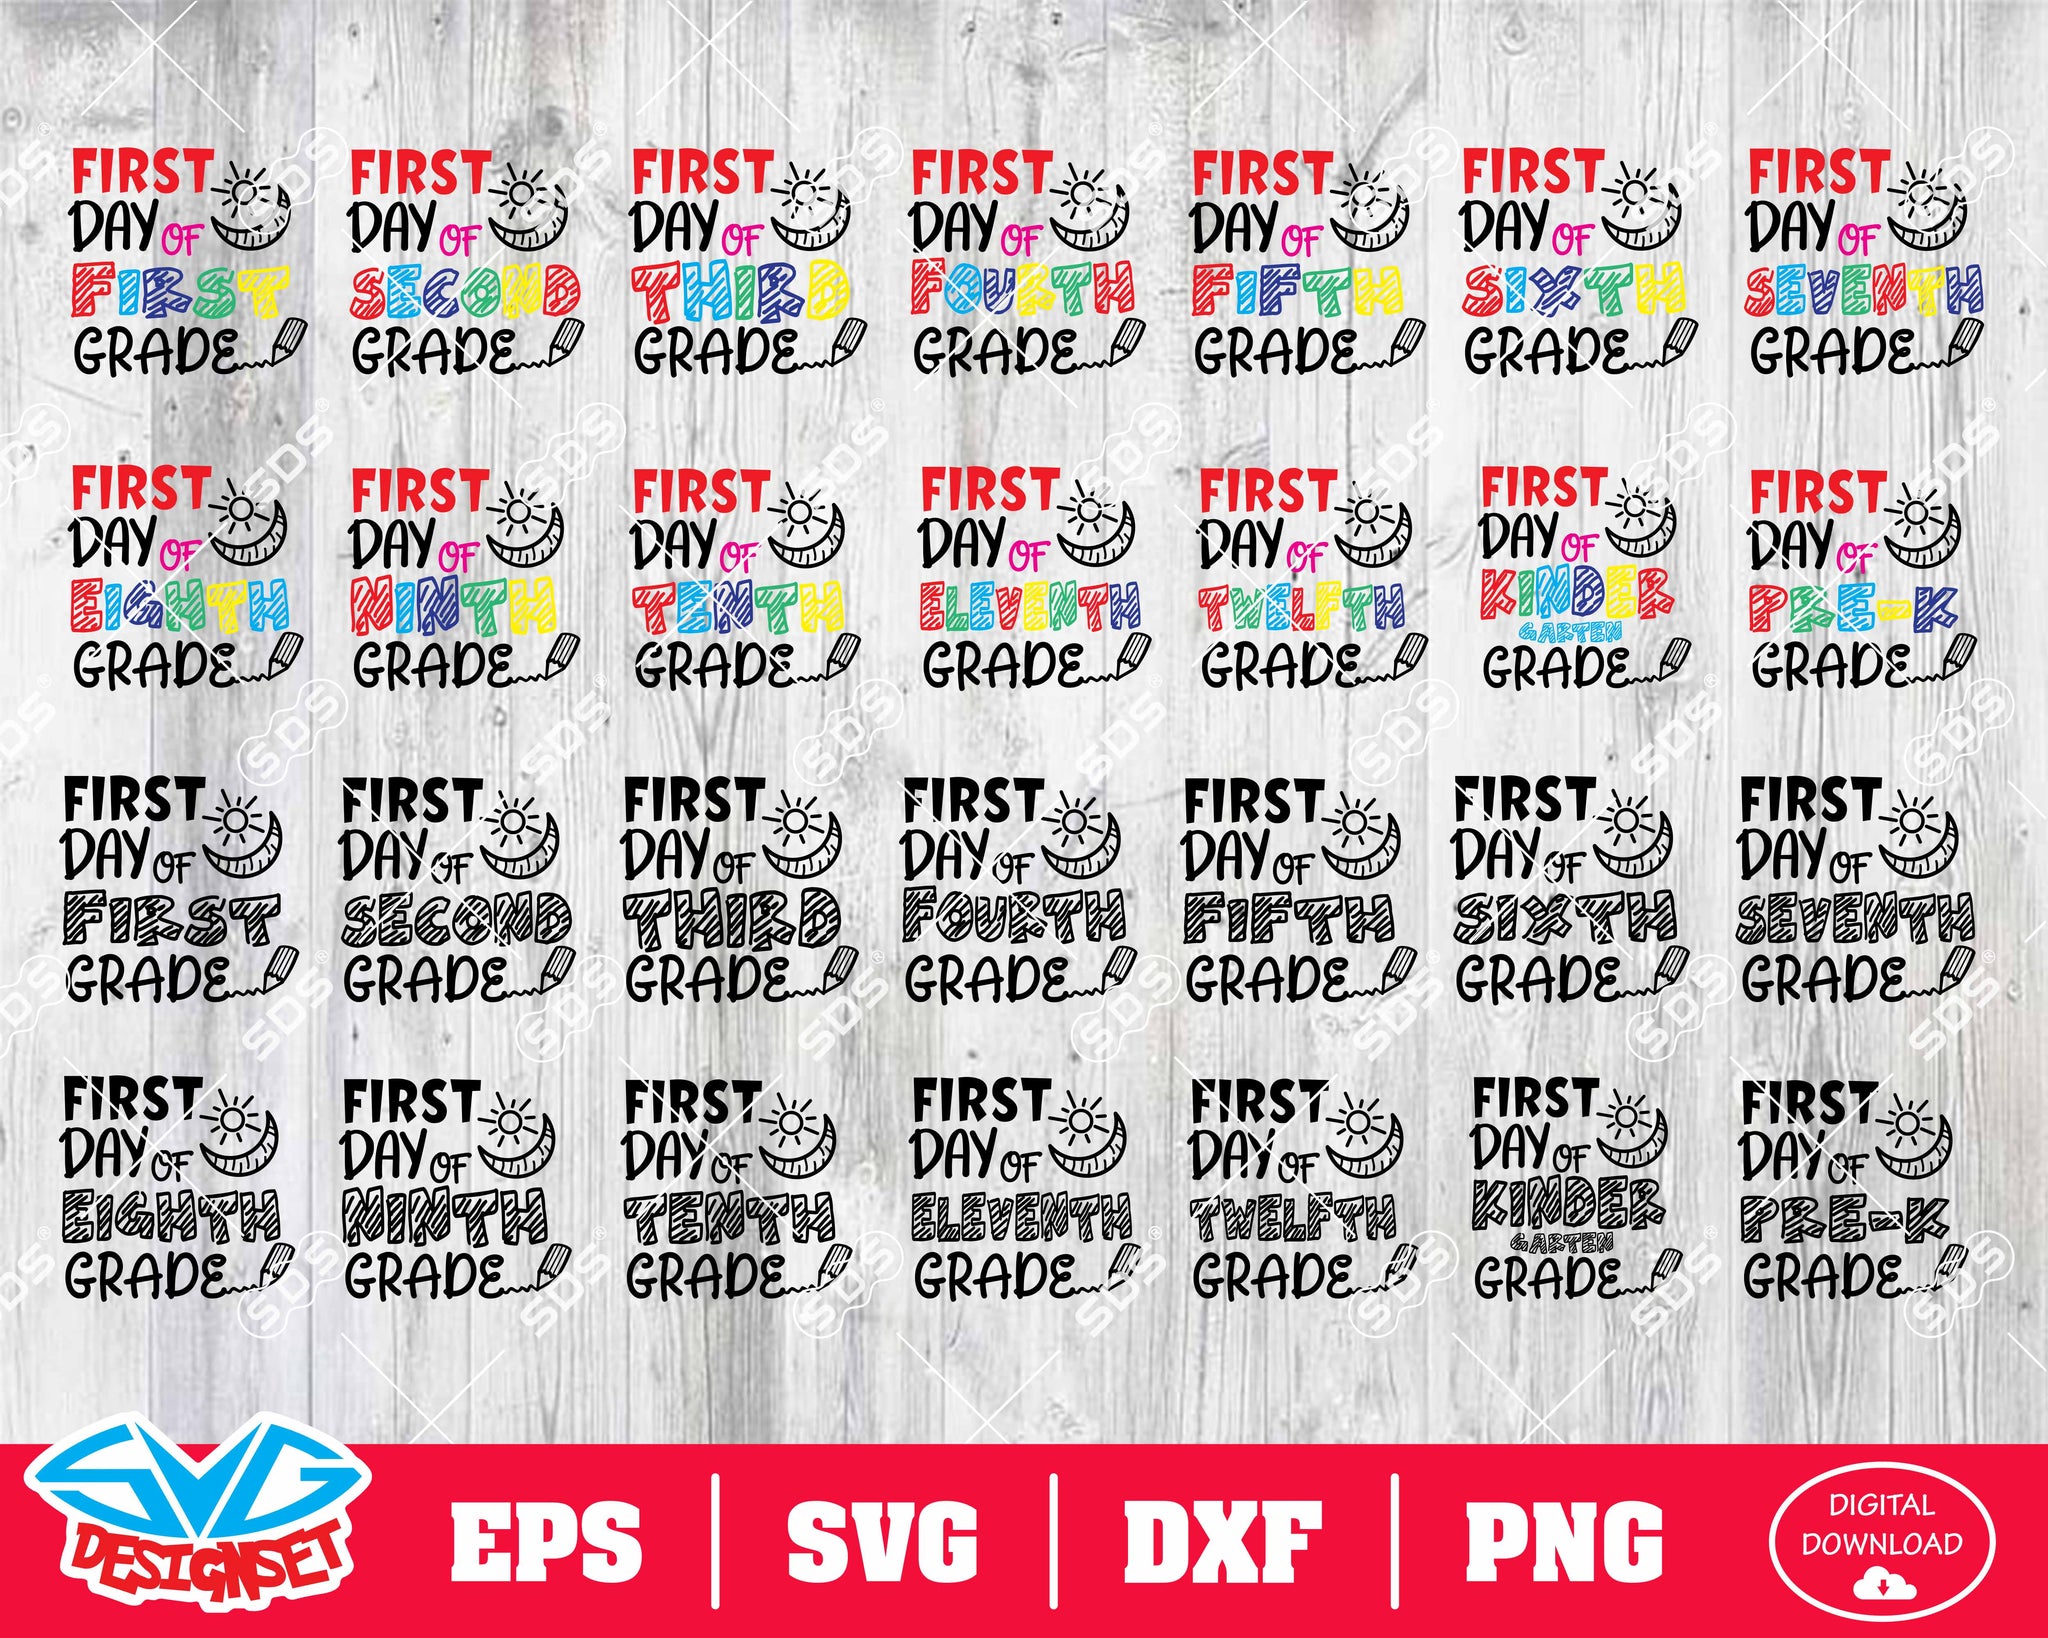 Back to School Svg, Dxf, Eps, Png, Clipart, Silhouette and Cutfiles #6 - SVGDesignSets